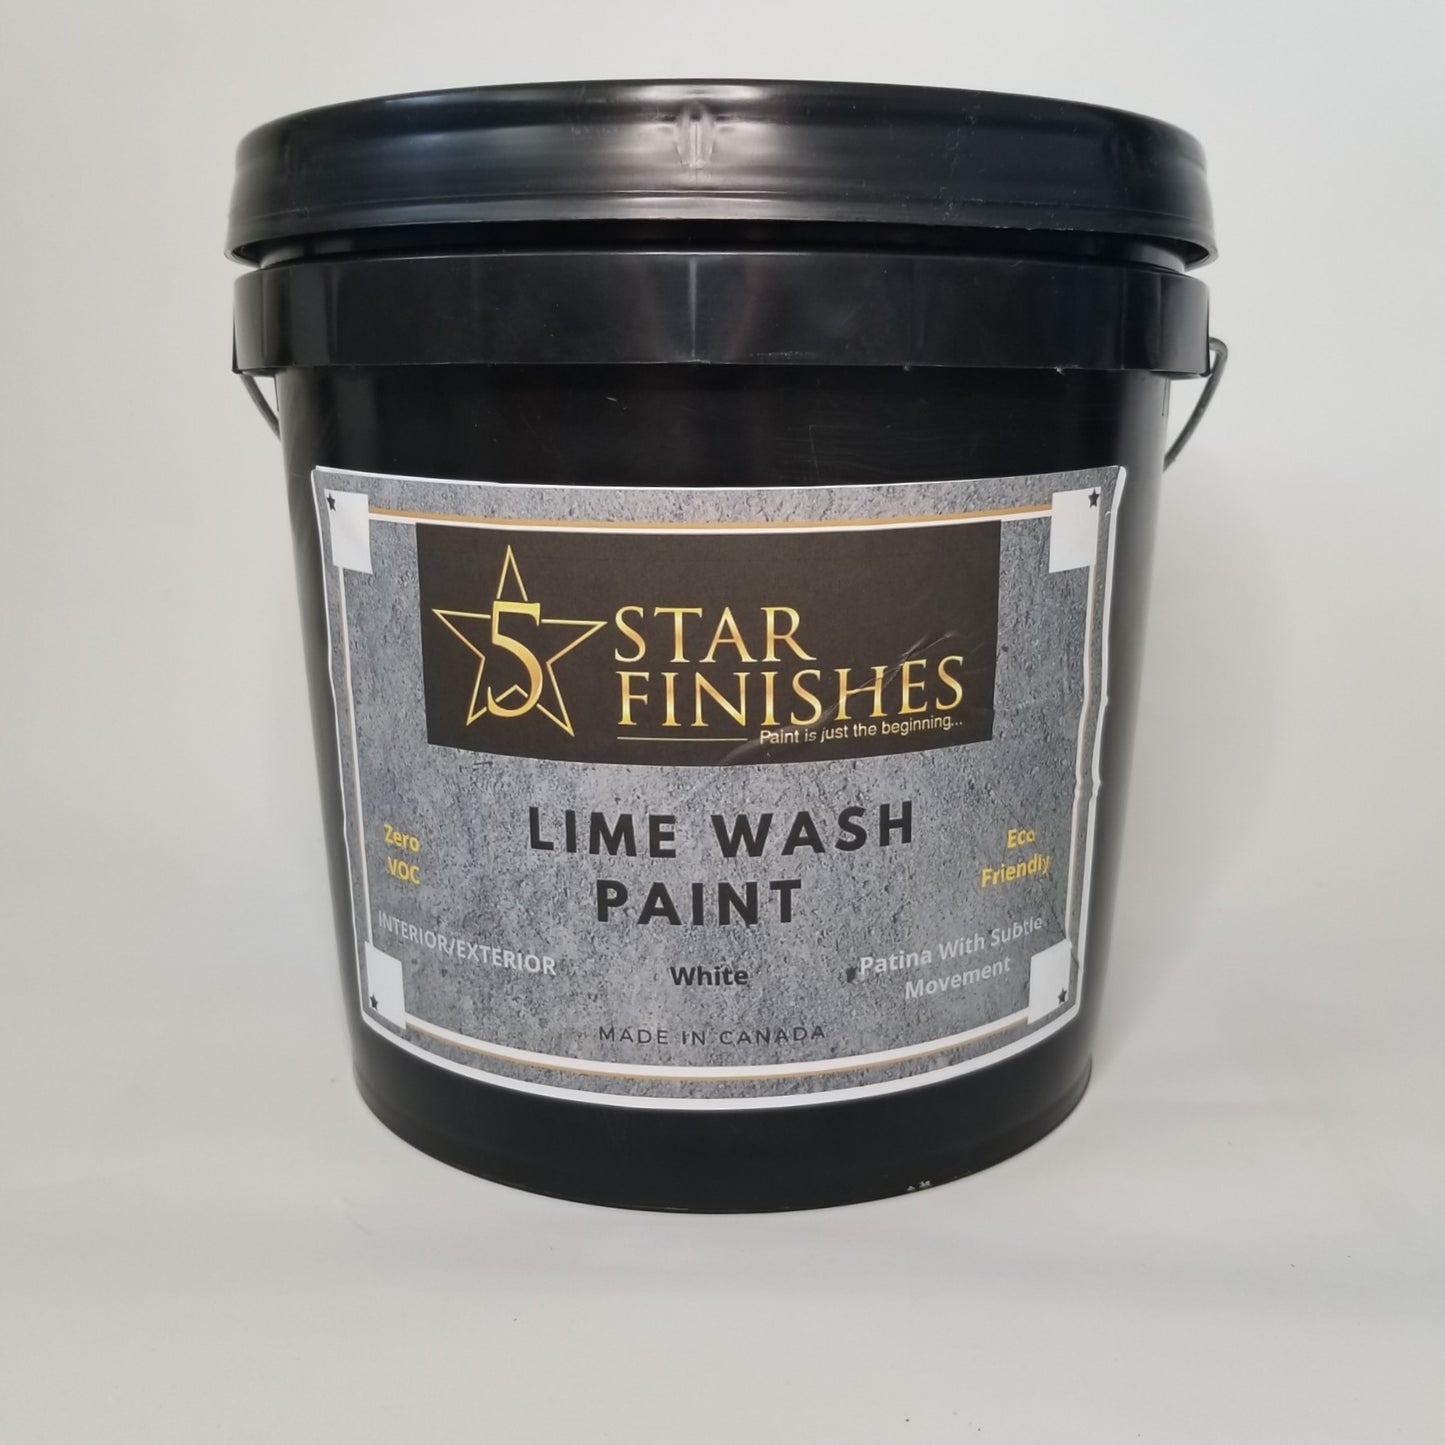 Lime Wash Paint - 5 Star Finishes Ltd